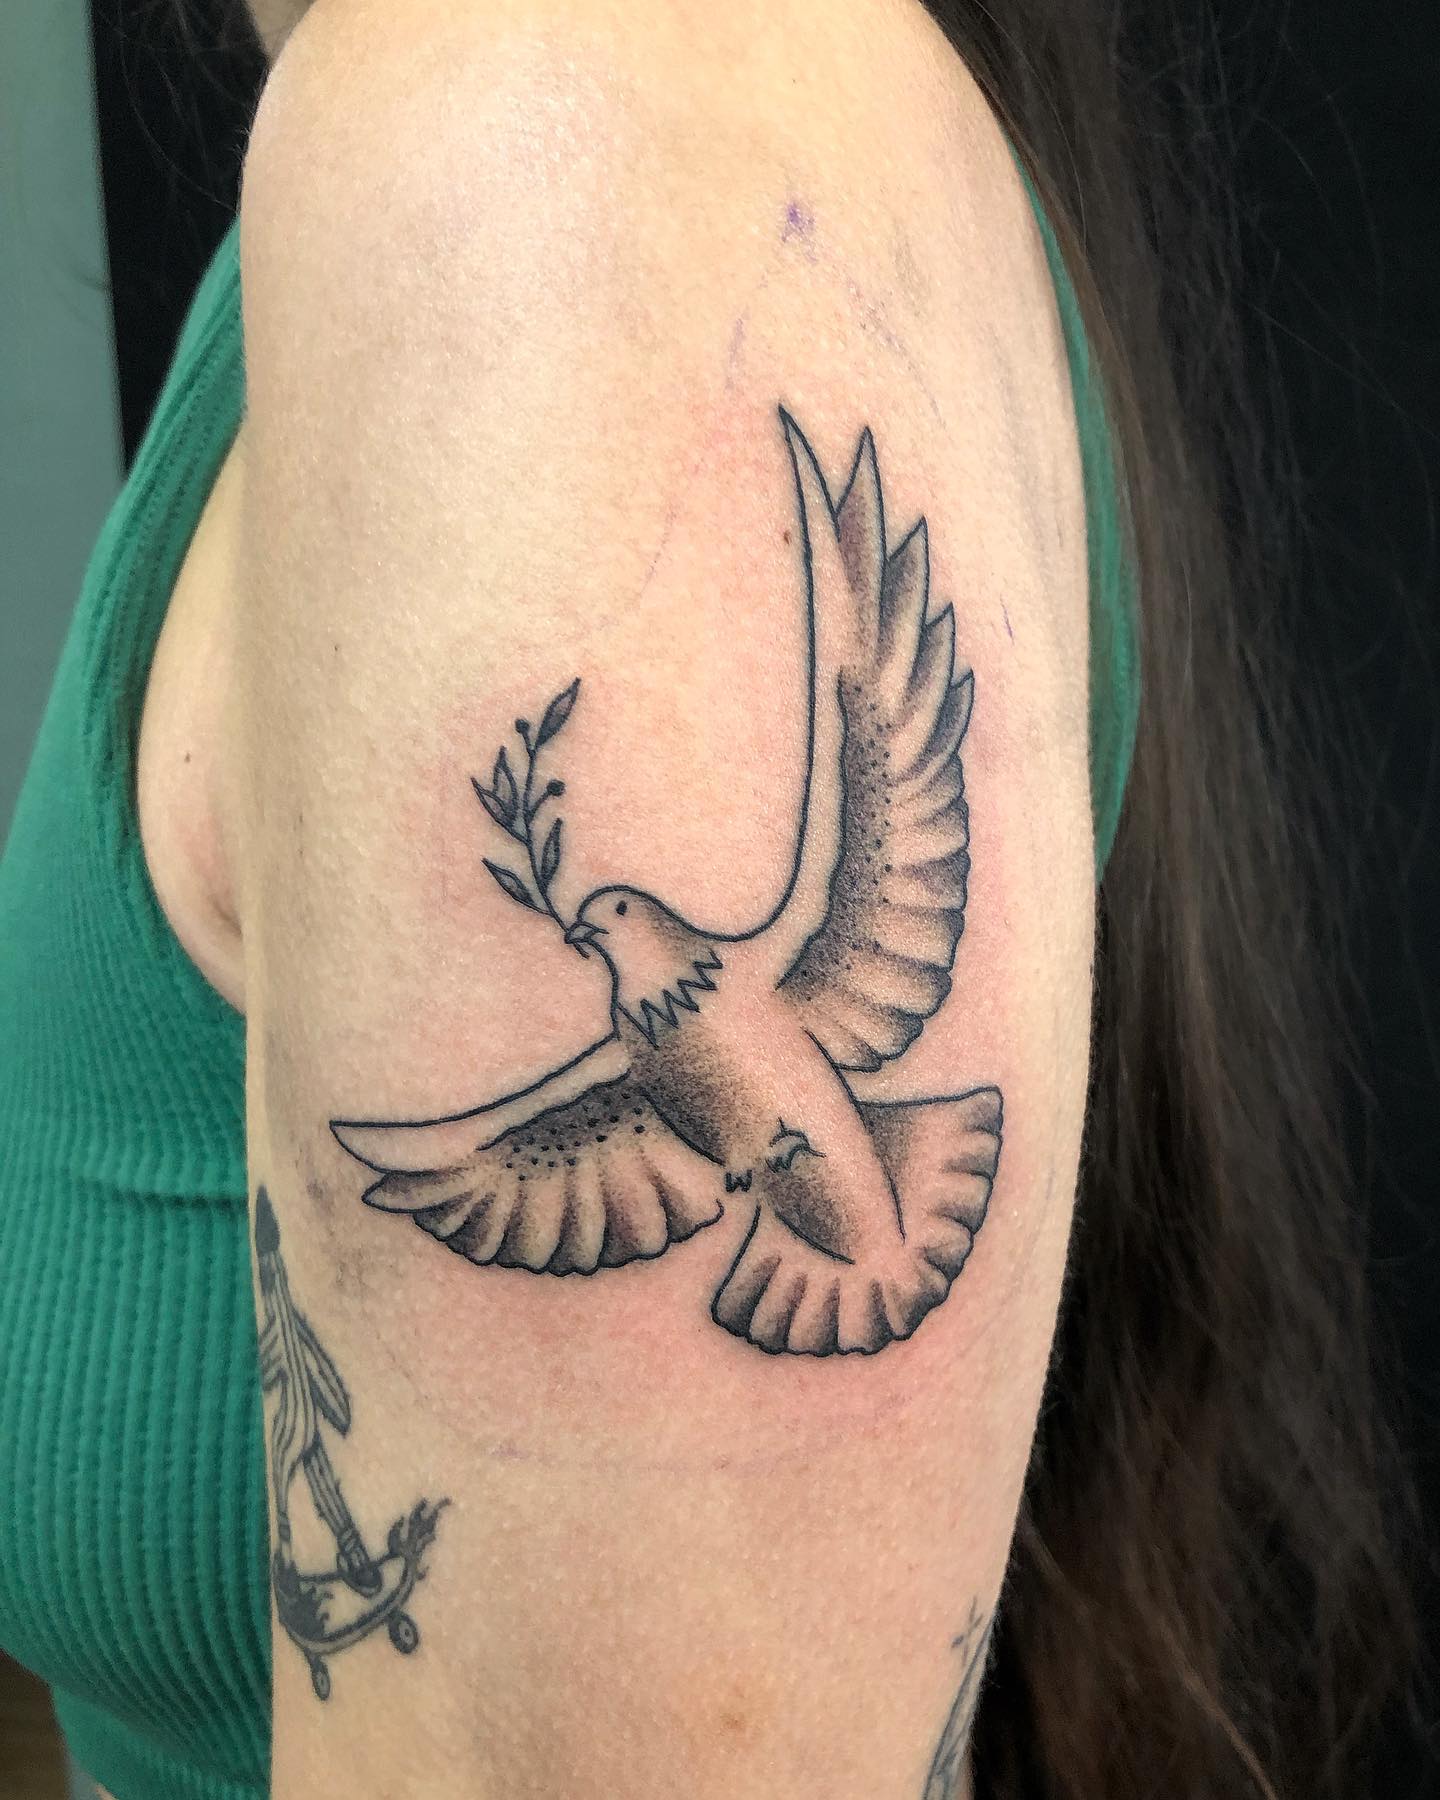 Microrealistic style dove tattoo located on the